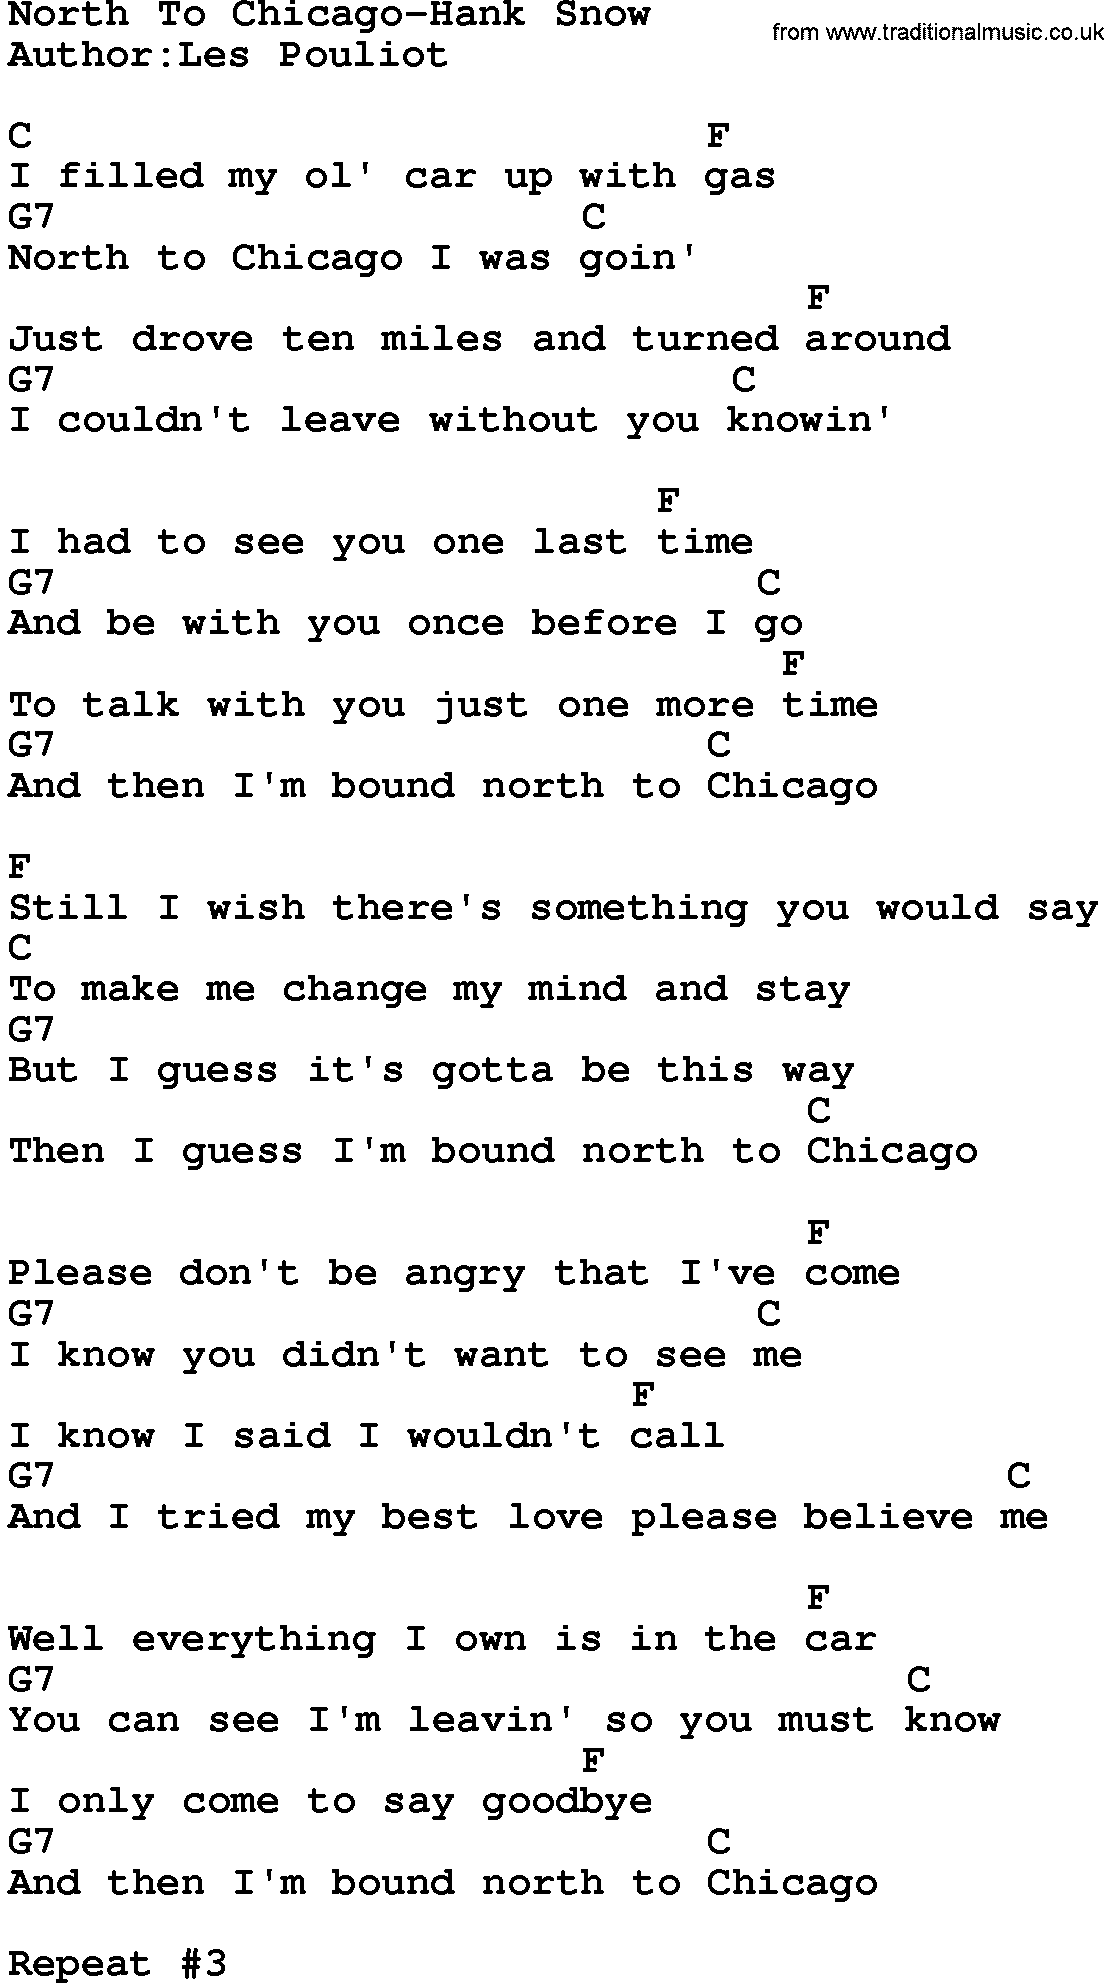 Country music song: North To Chicago-Hank Snow lyrics and chords